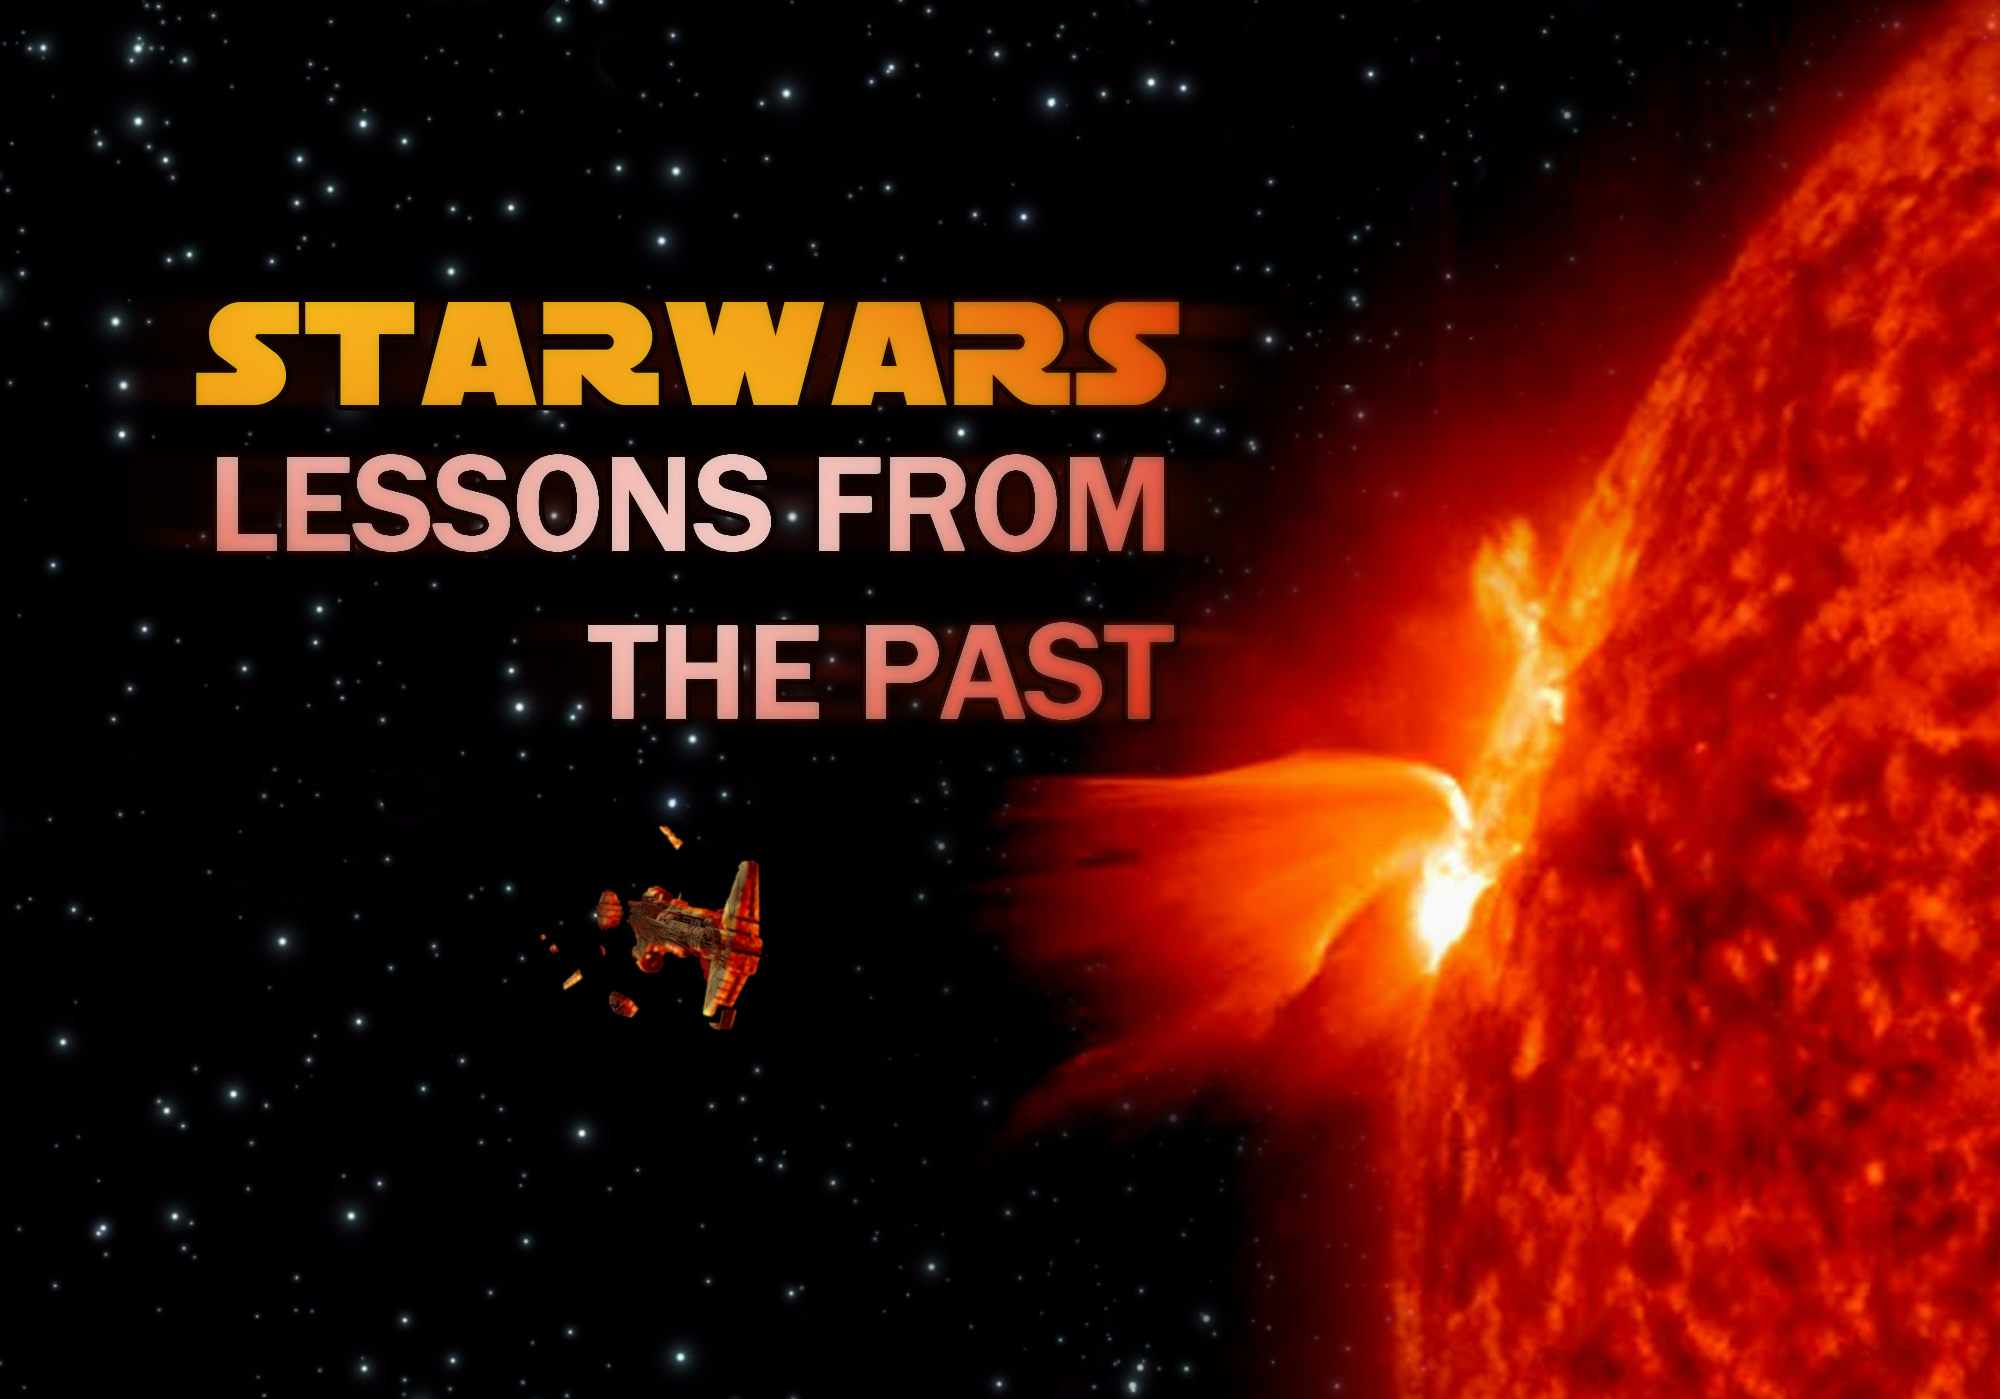 Star Wars: Lessons from the Past (Force and Destiny)